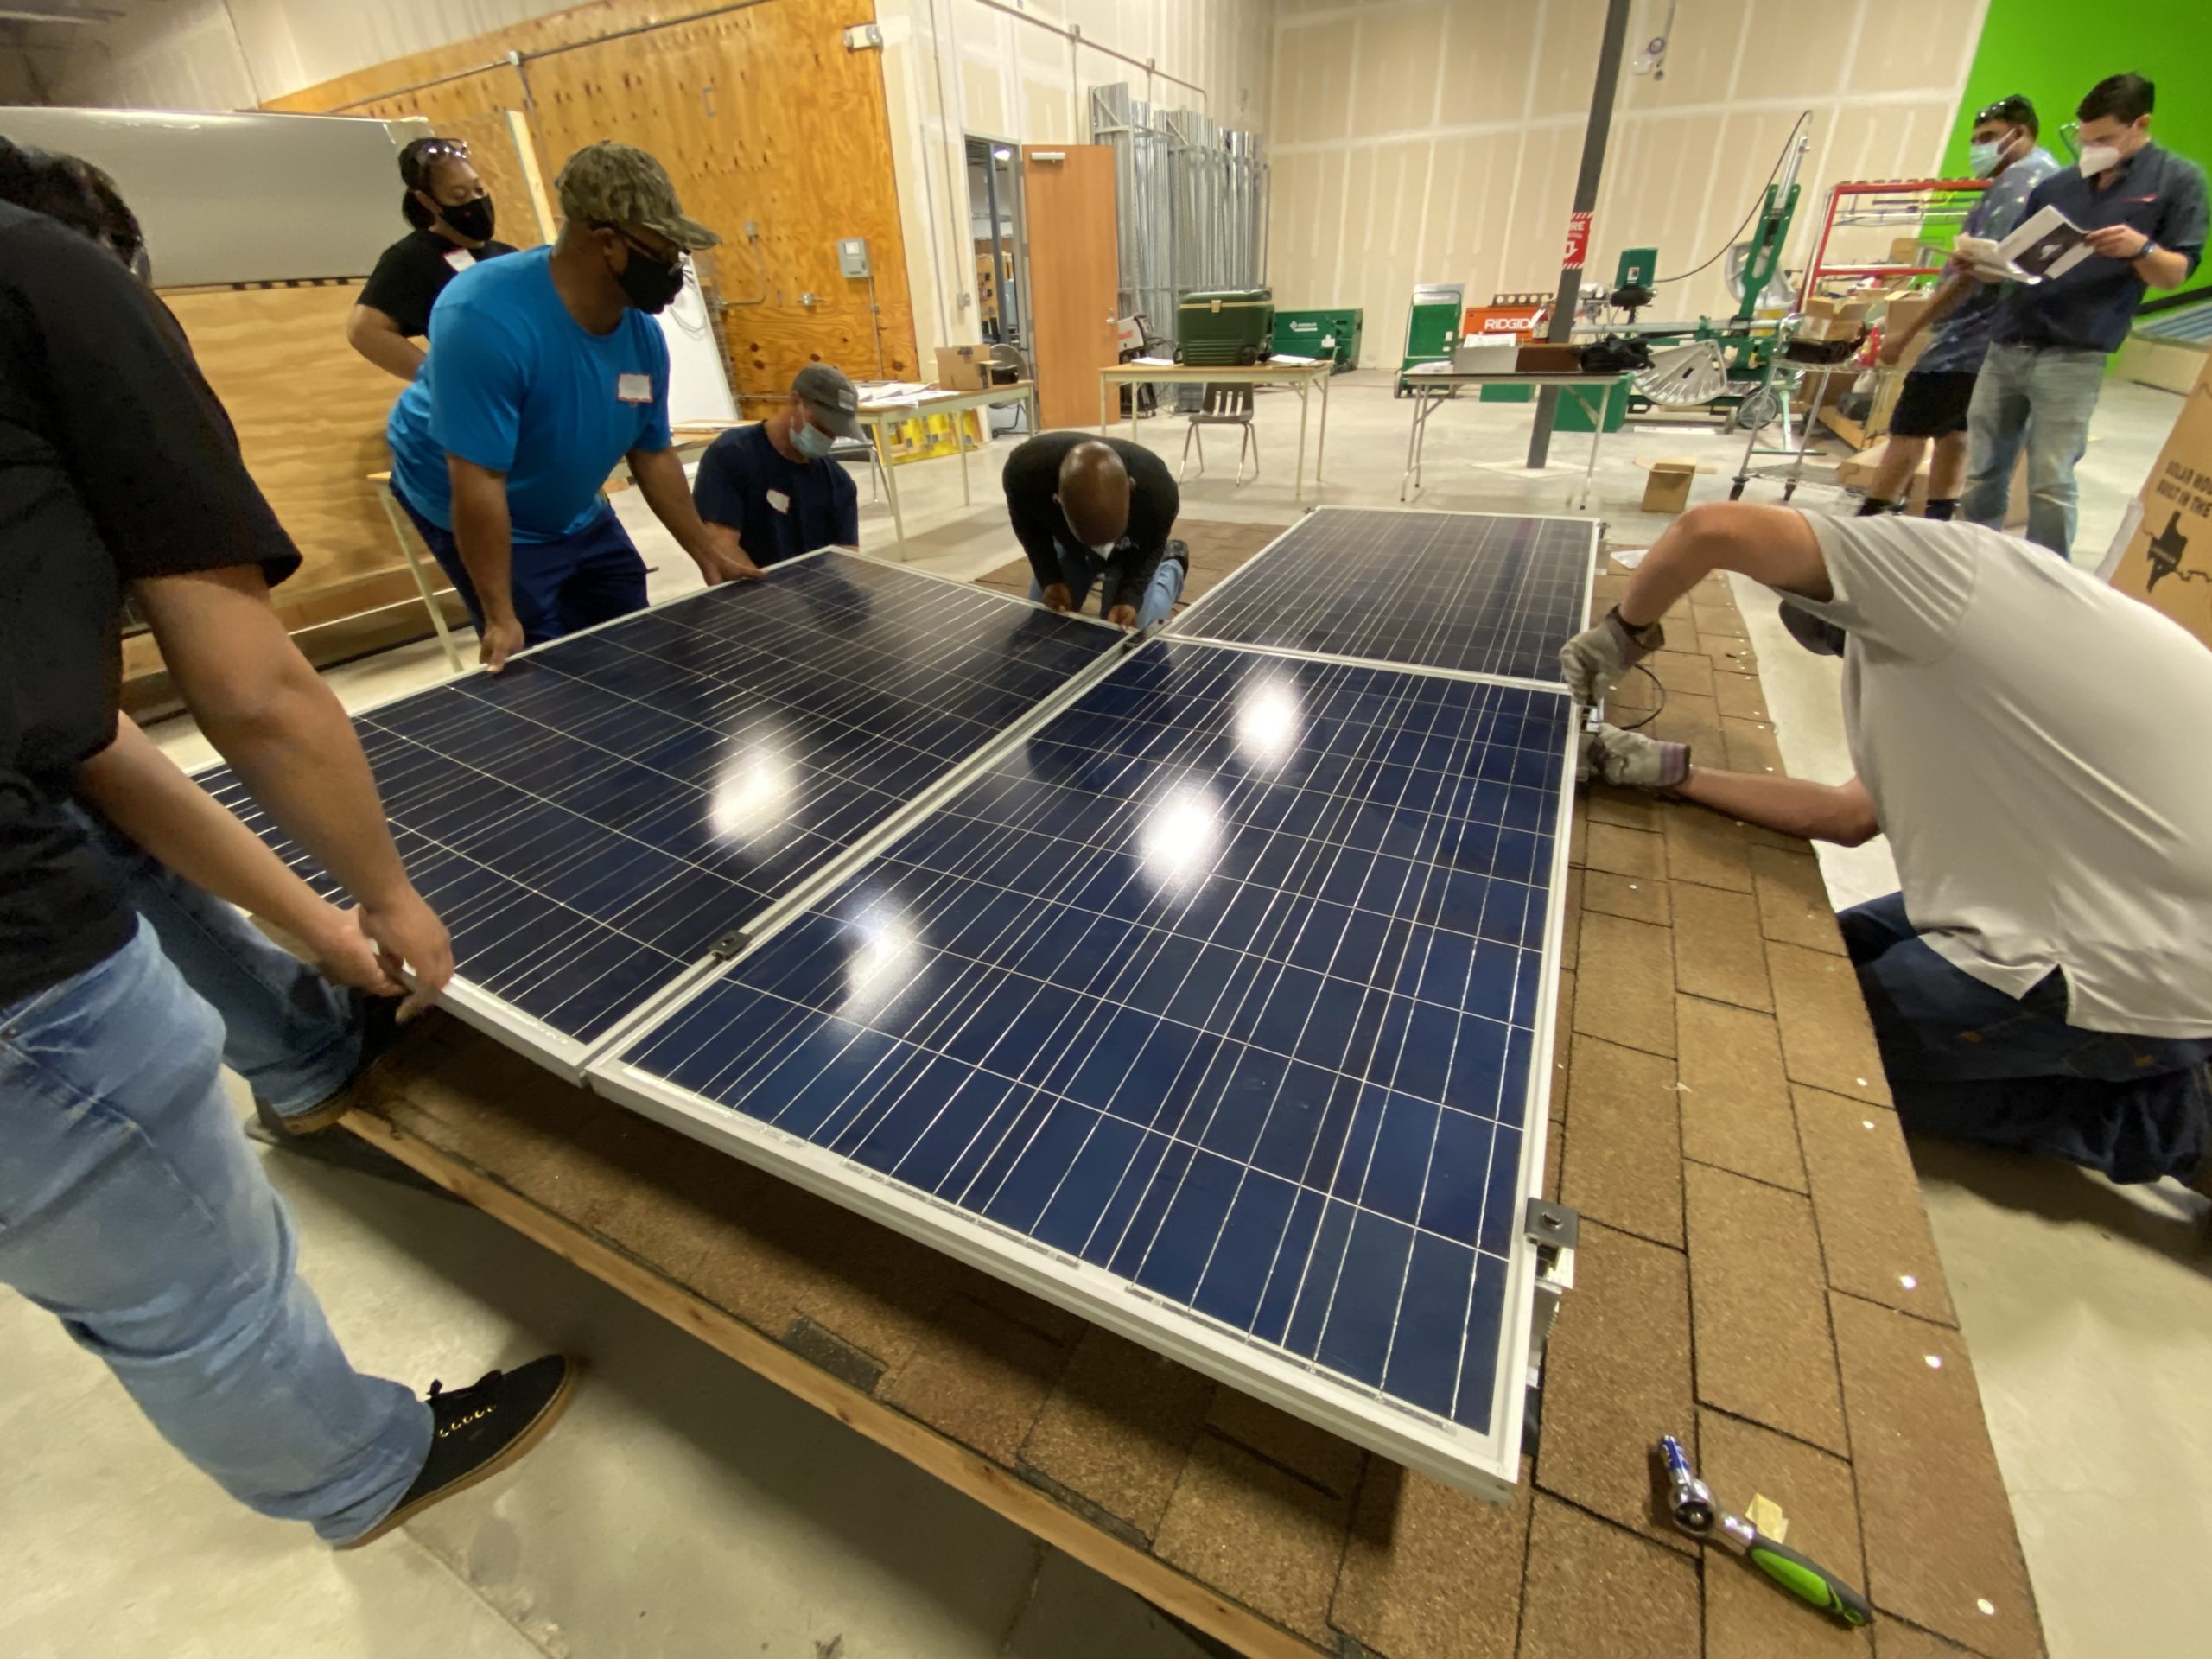 Solar Power Training Course Teaches How to Make Solar and Electrical Circuits 